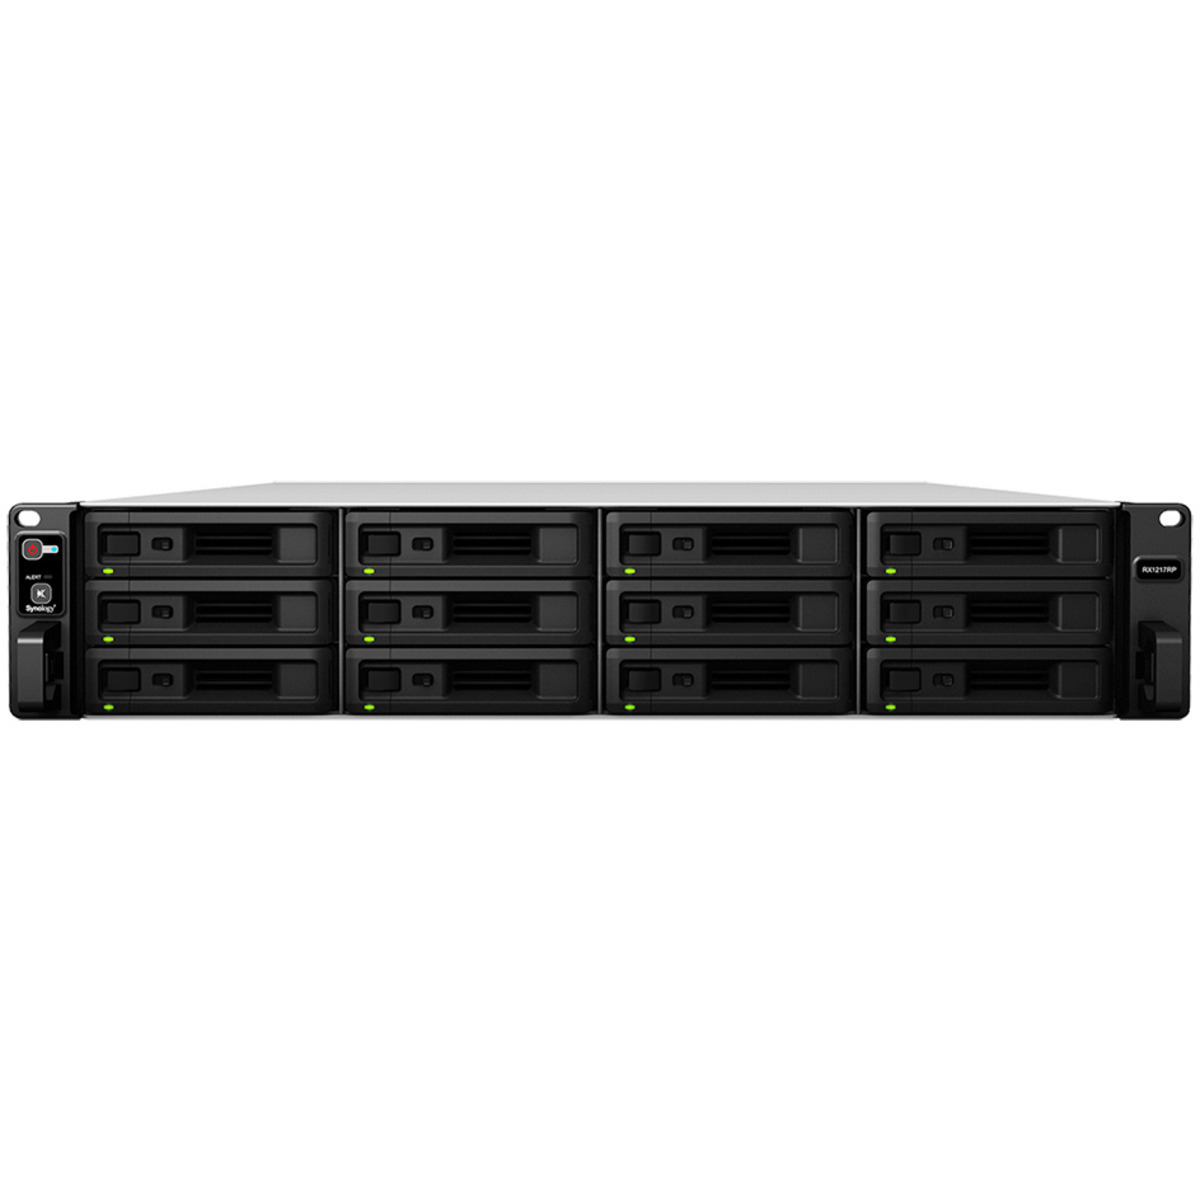 buy $3810 Synology RX1217RP 48tb RackMount Expansion Enclosure 12x4000gb Western Digital Blue WD40EZRZ 3.5 5400rpm SATA 6Gb/s HDD CONSUMER Class Drives Installed - Burn-In Tested - nas headquarters buy network attached storage server device das new raid-5 free shipping usa christmas new year holiday sale RX1217RP